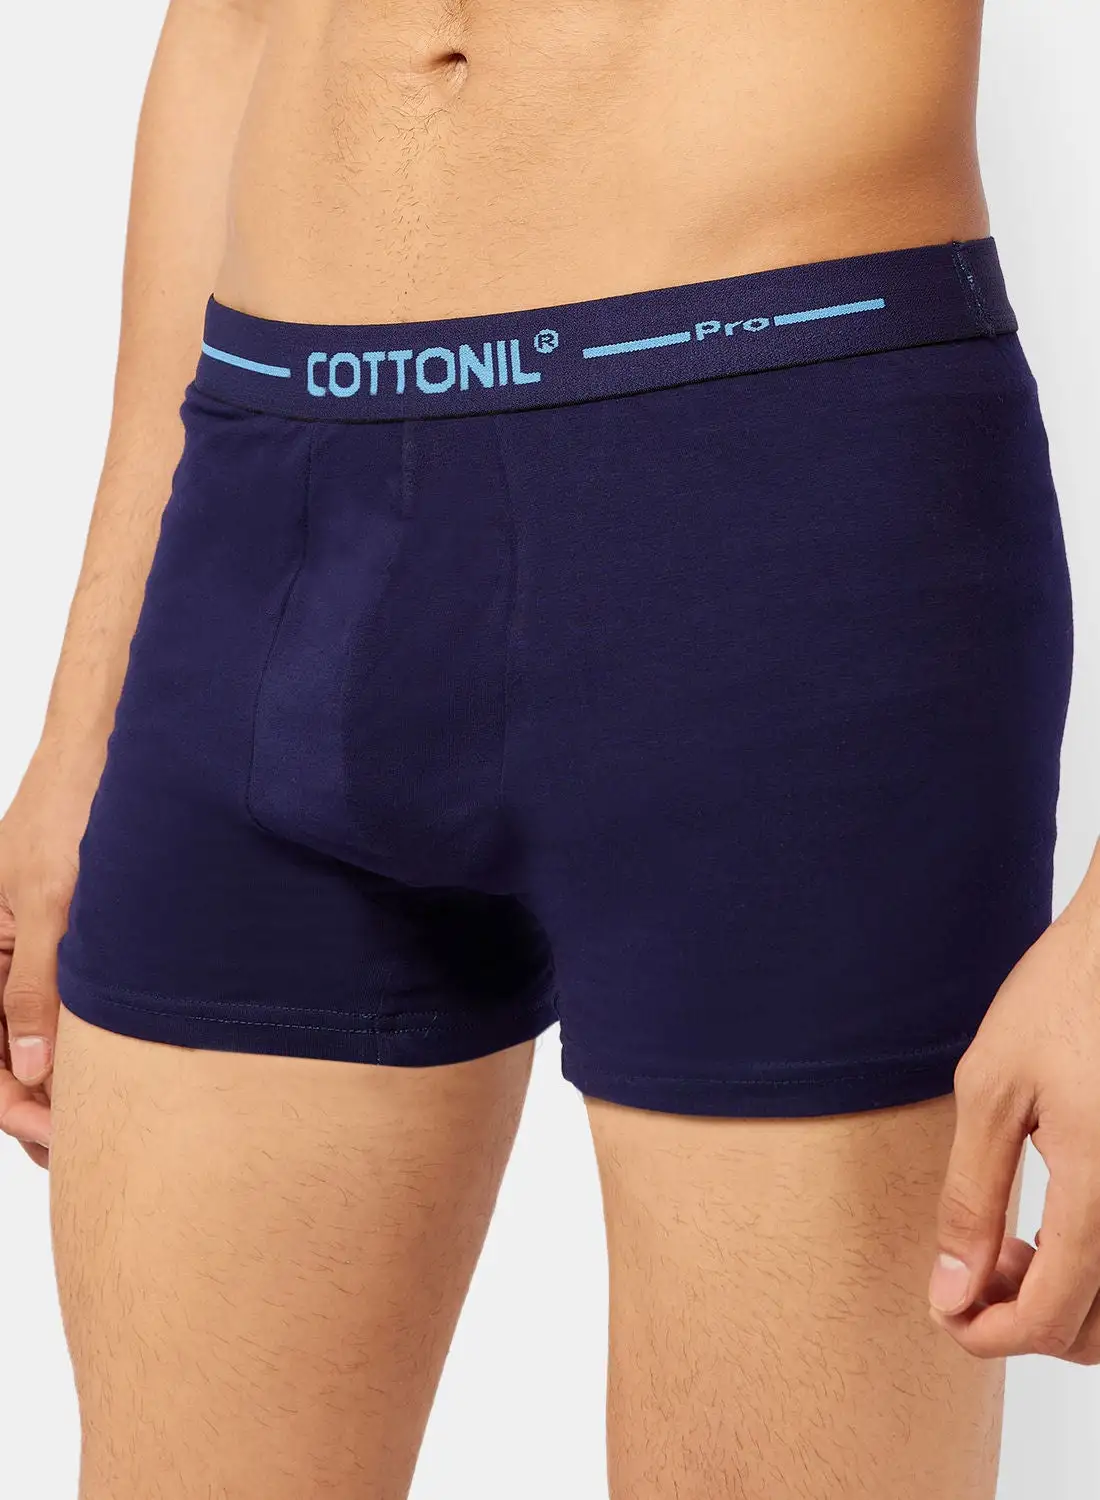 COTTONIL Basic Cotton Boxers (Pack of 6)